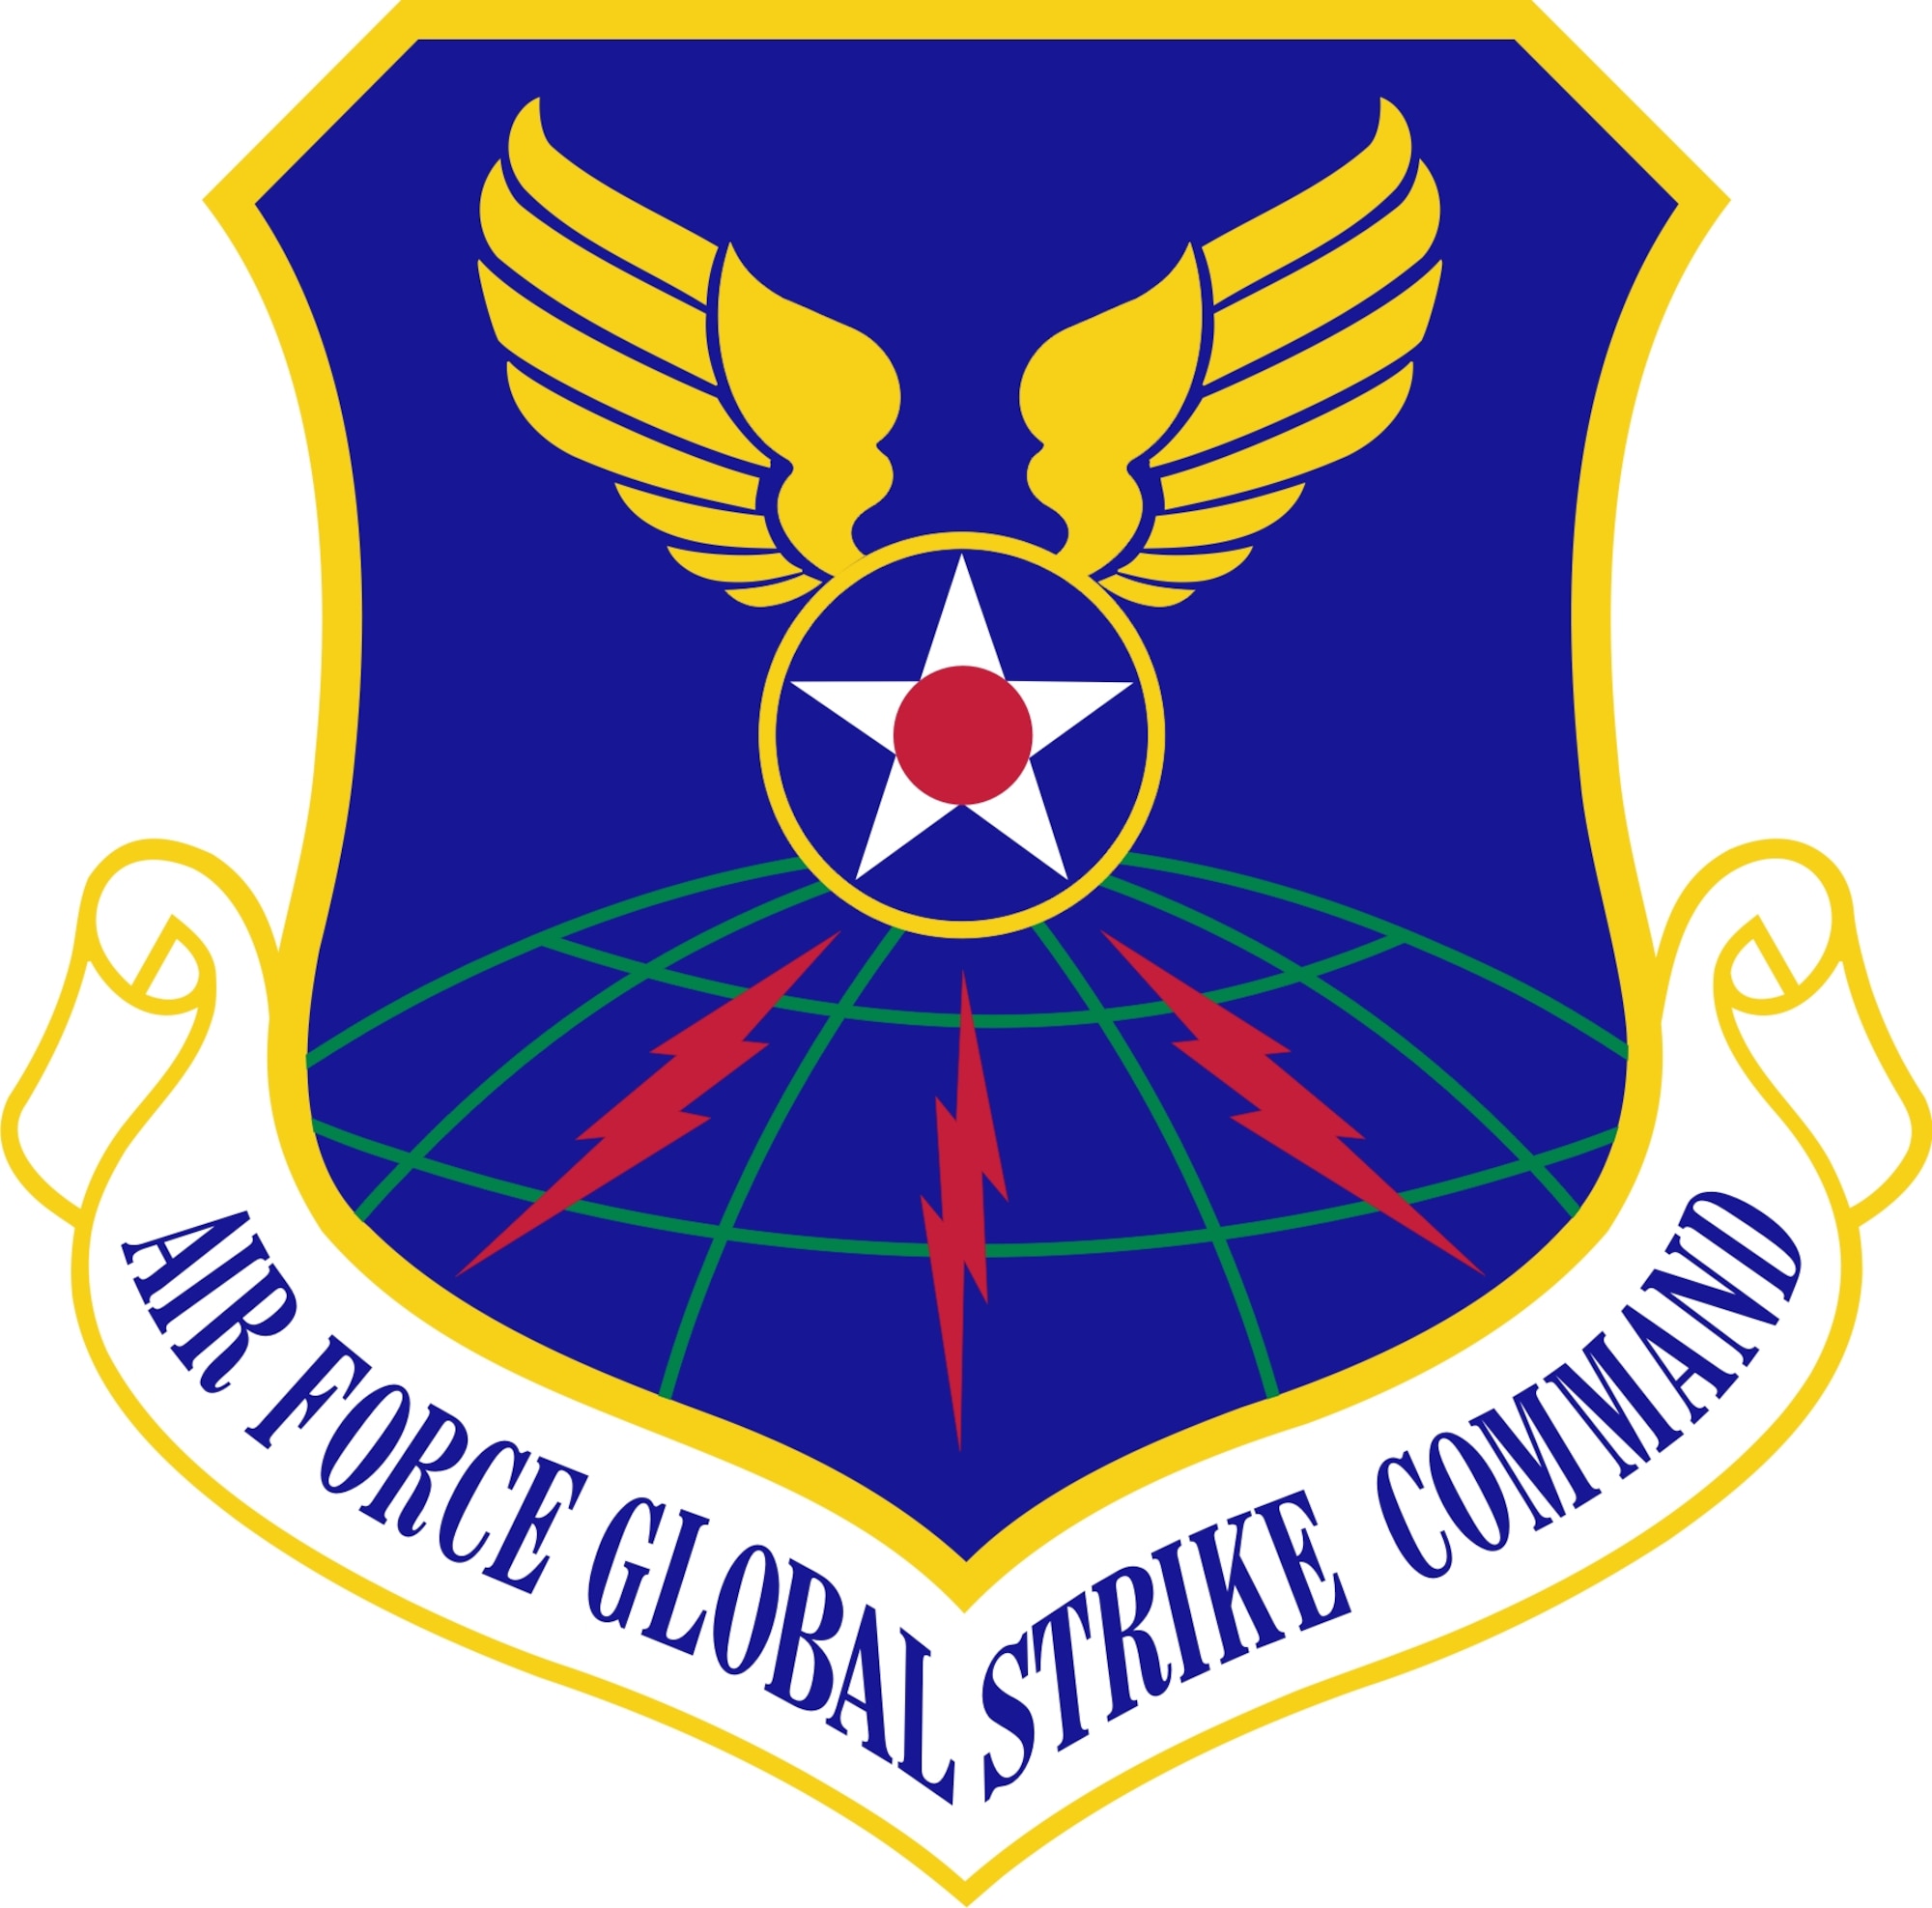 Striker Trident is an Air Force - Navy exchange program that supports professional development of company grade officers trained and qualified in similar nuclear deterrence missions.